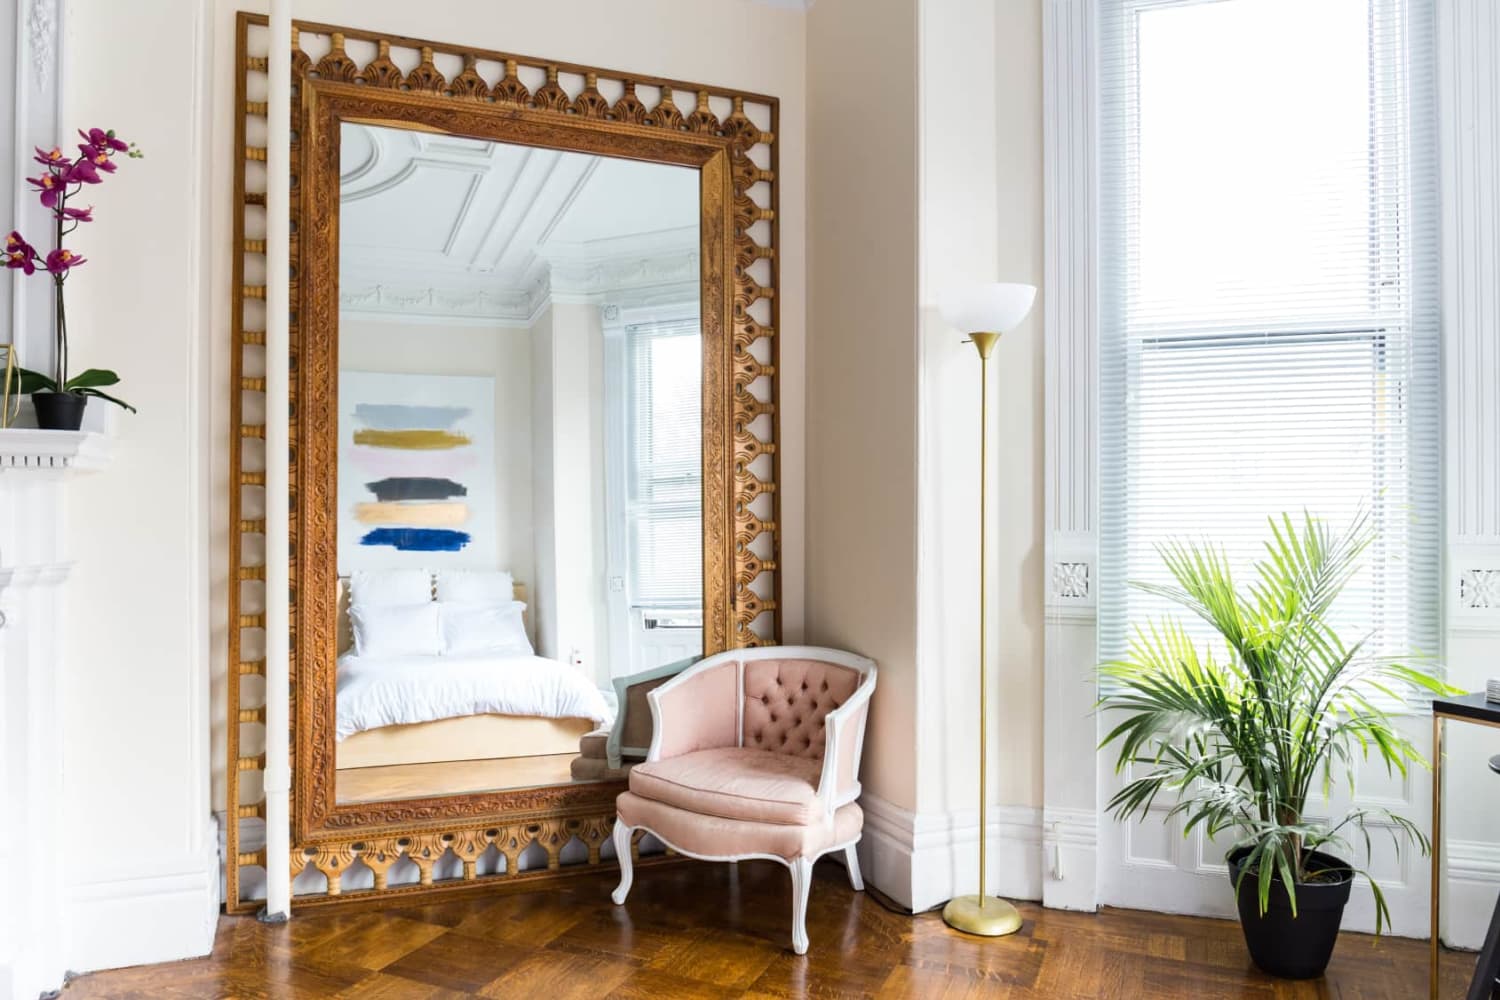 Install Wall Mirrors Without Damaging Your Apartment Walls